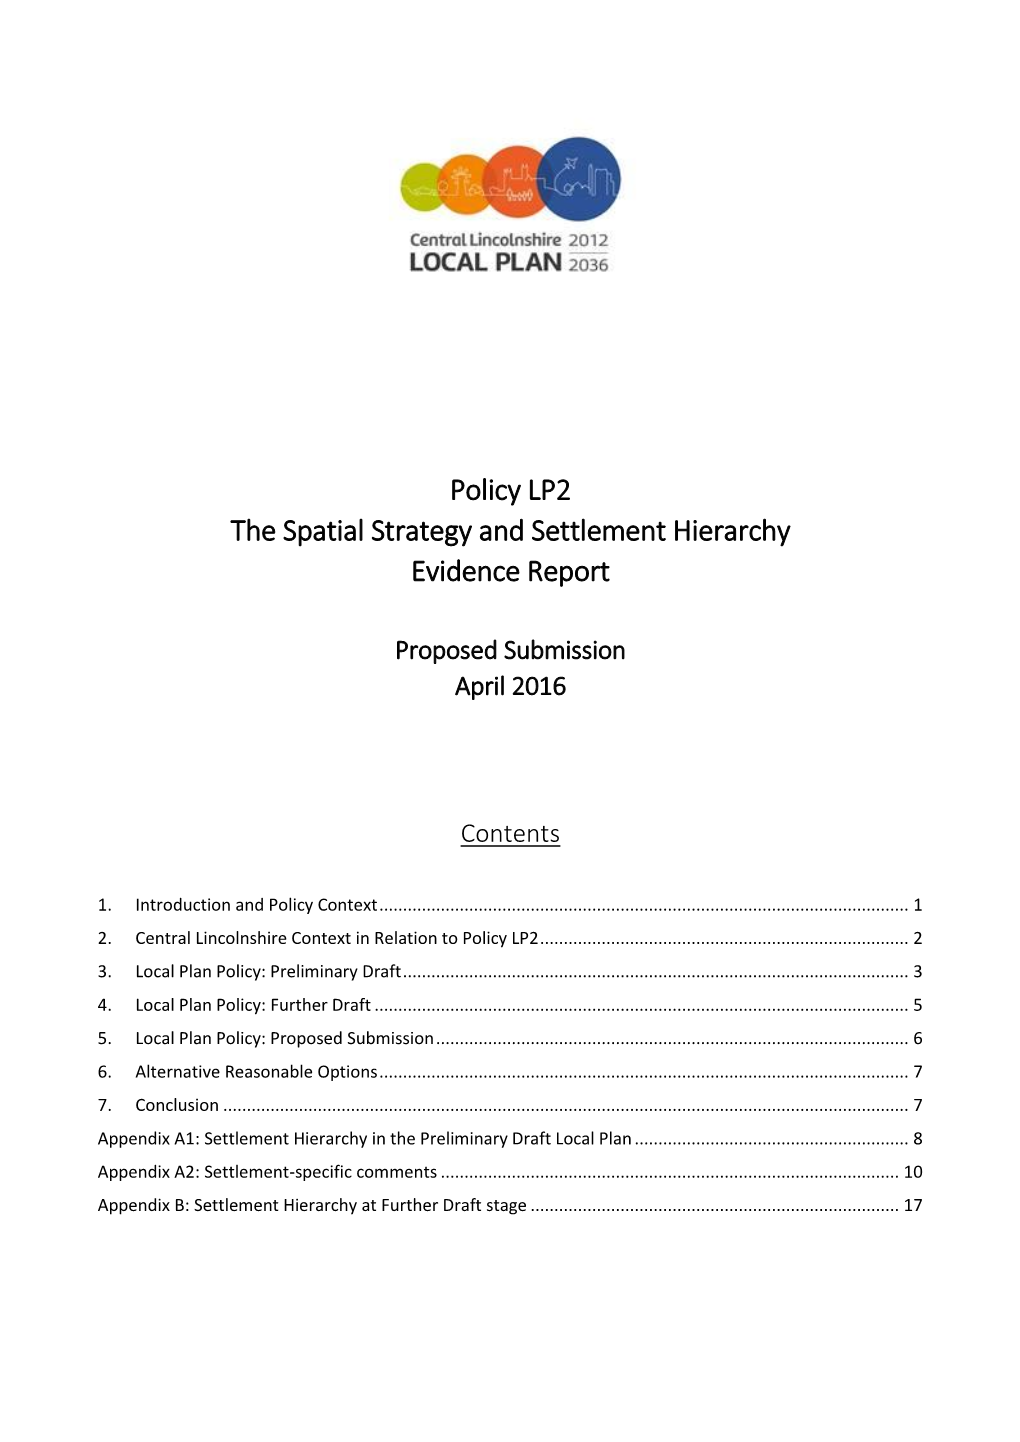 Policy LP2 the Spatial Strategy and Settlement Hierarchy Evidence Report